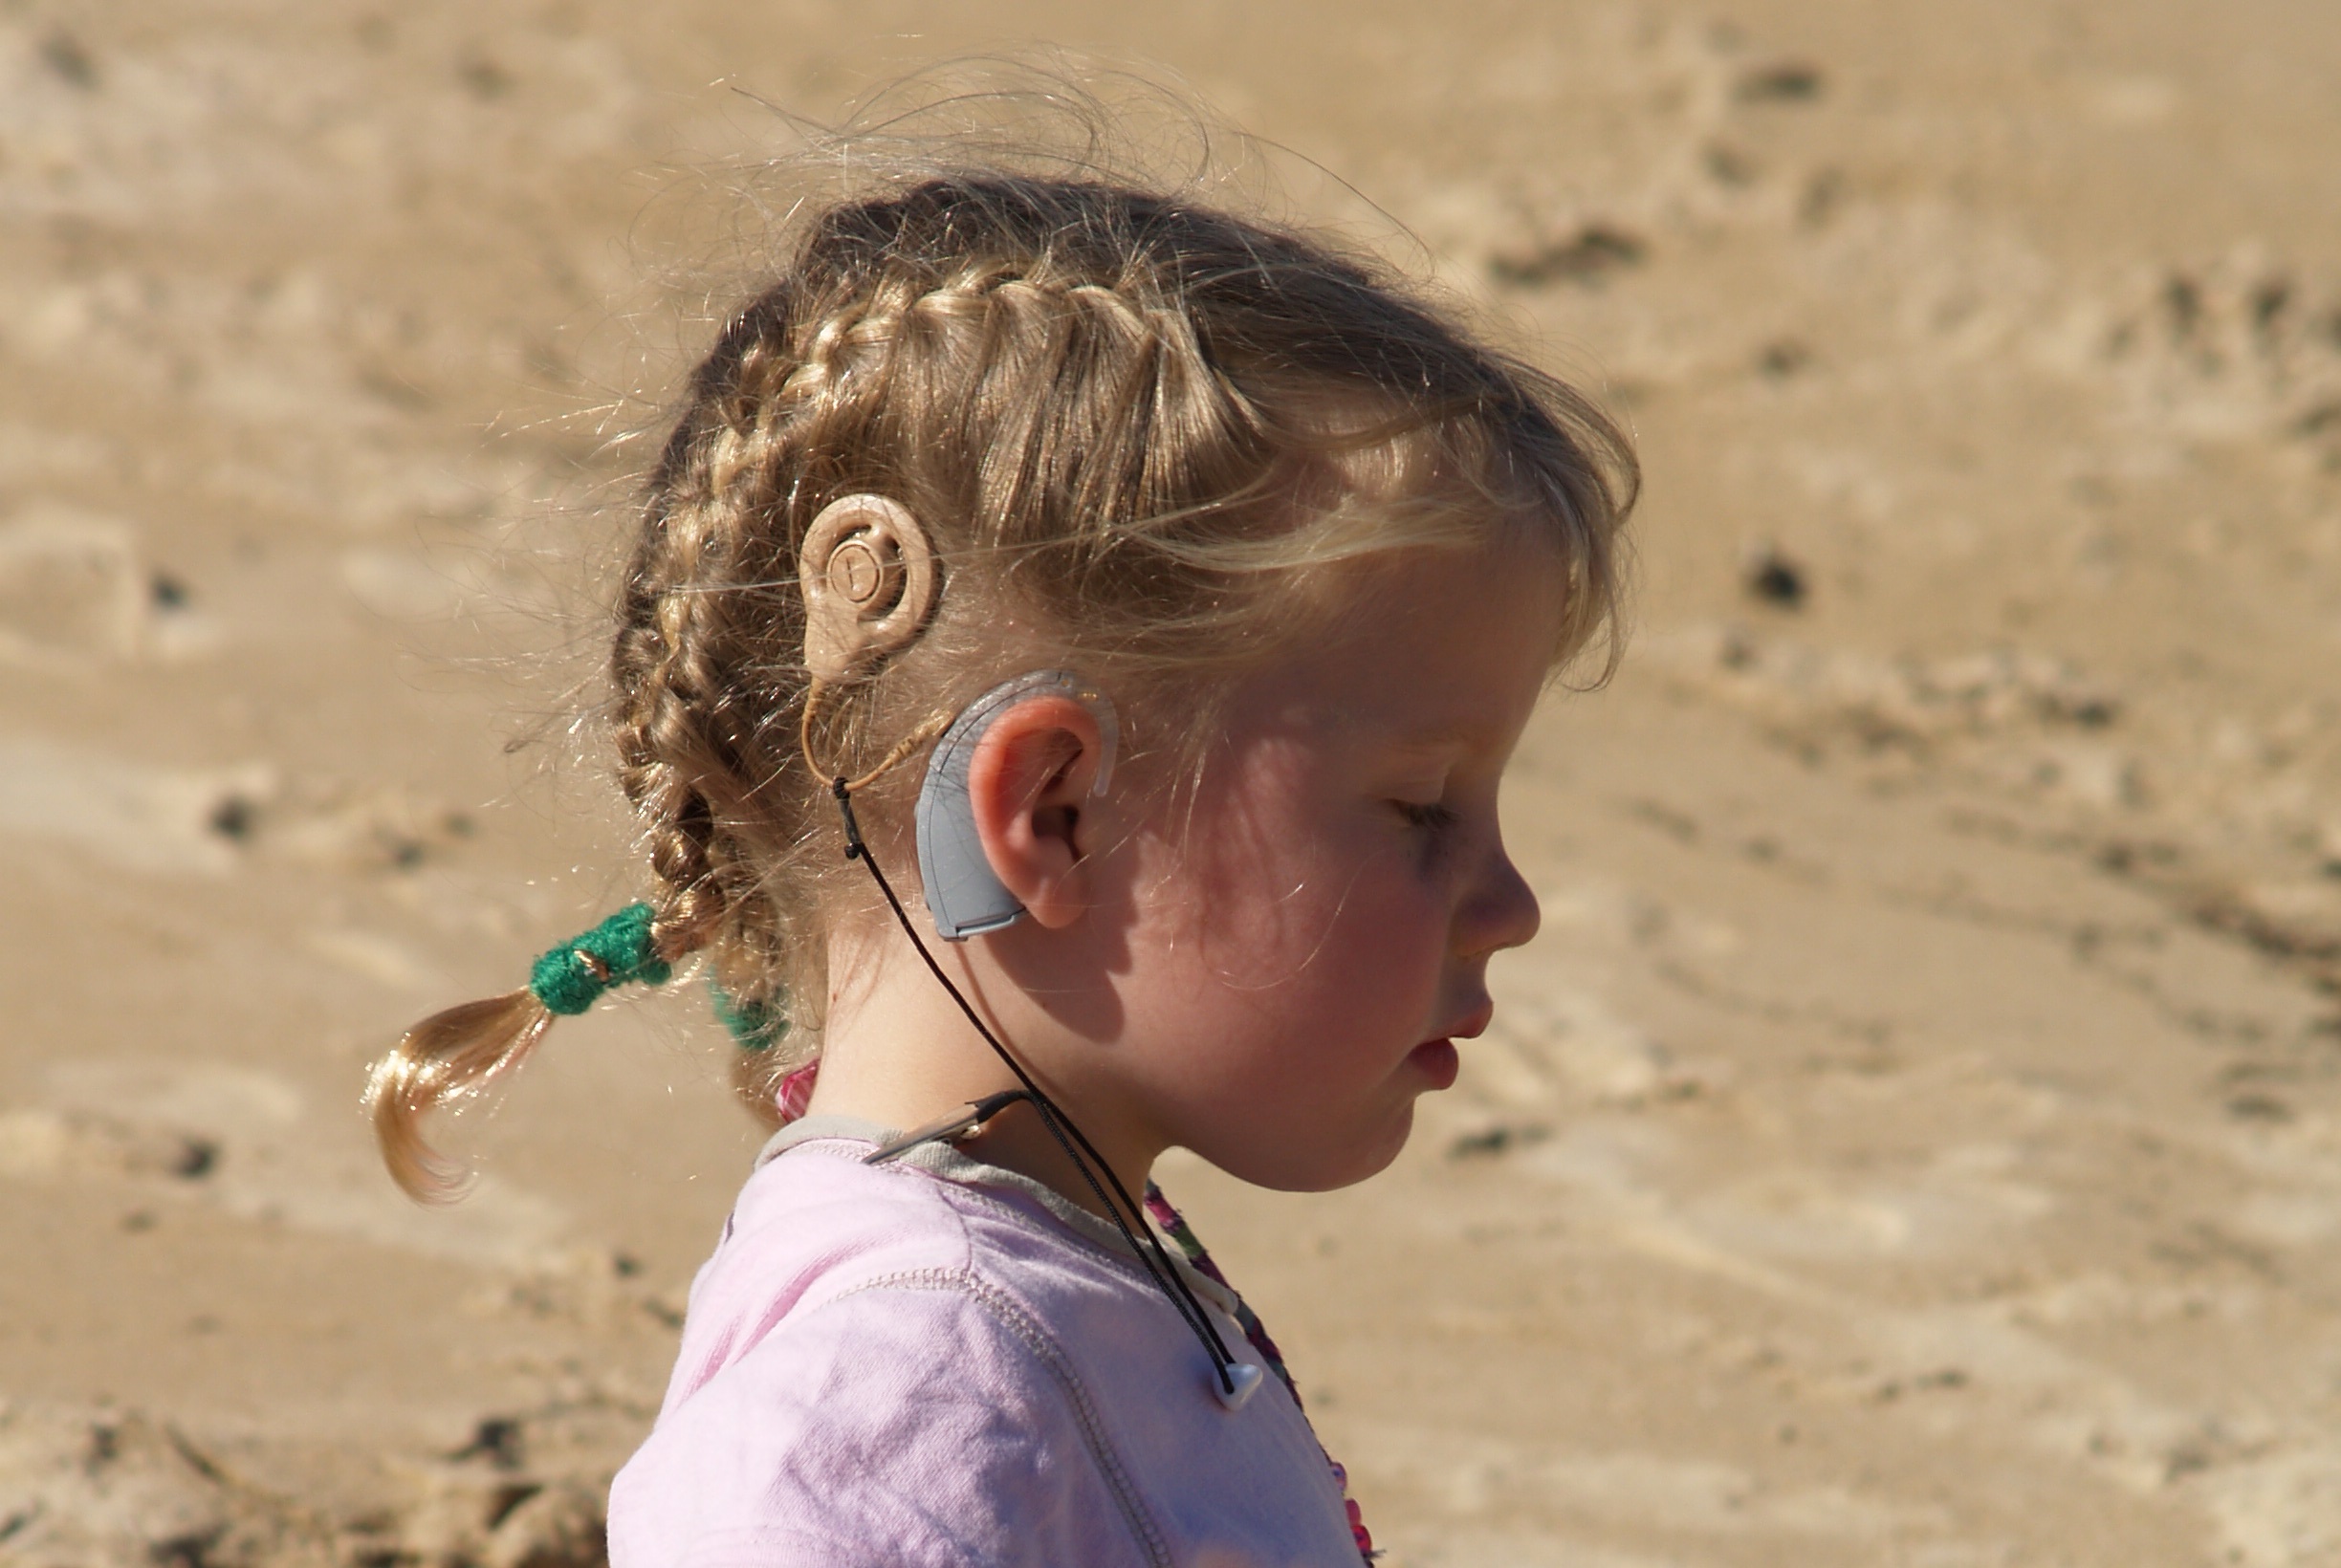 A Girl With a Cochlear Implant